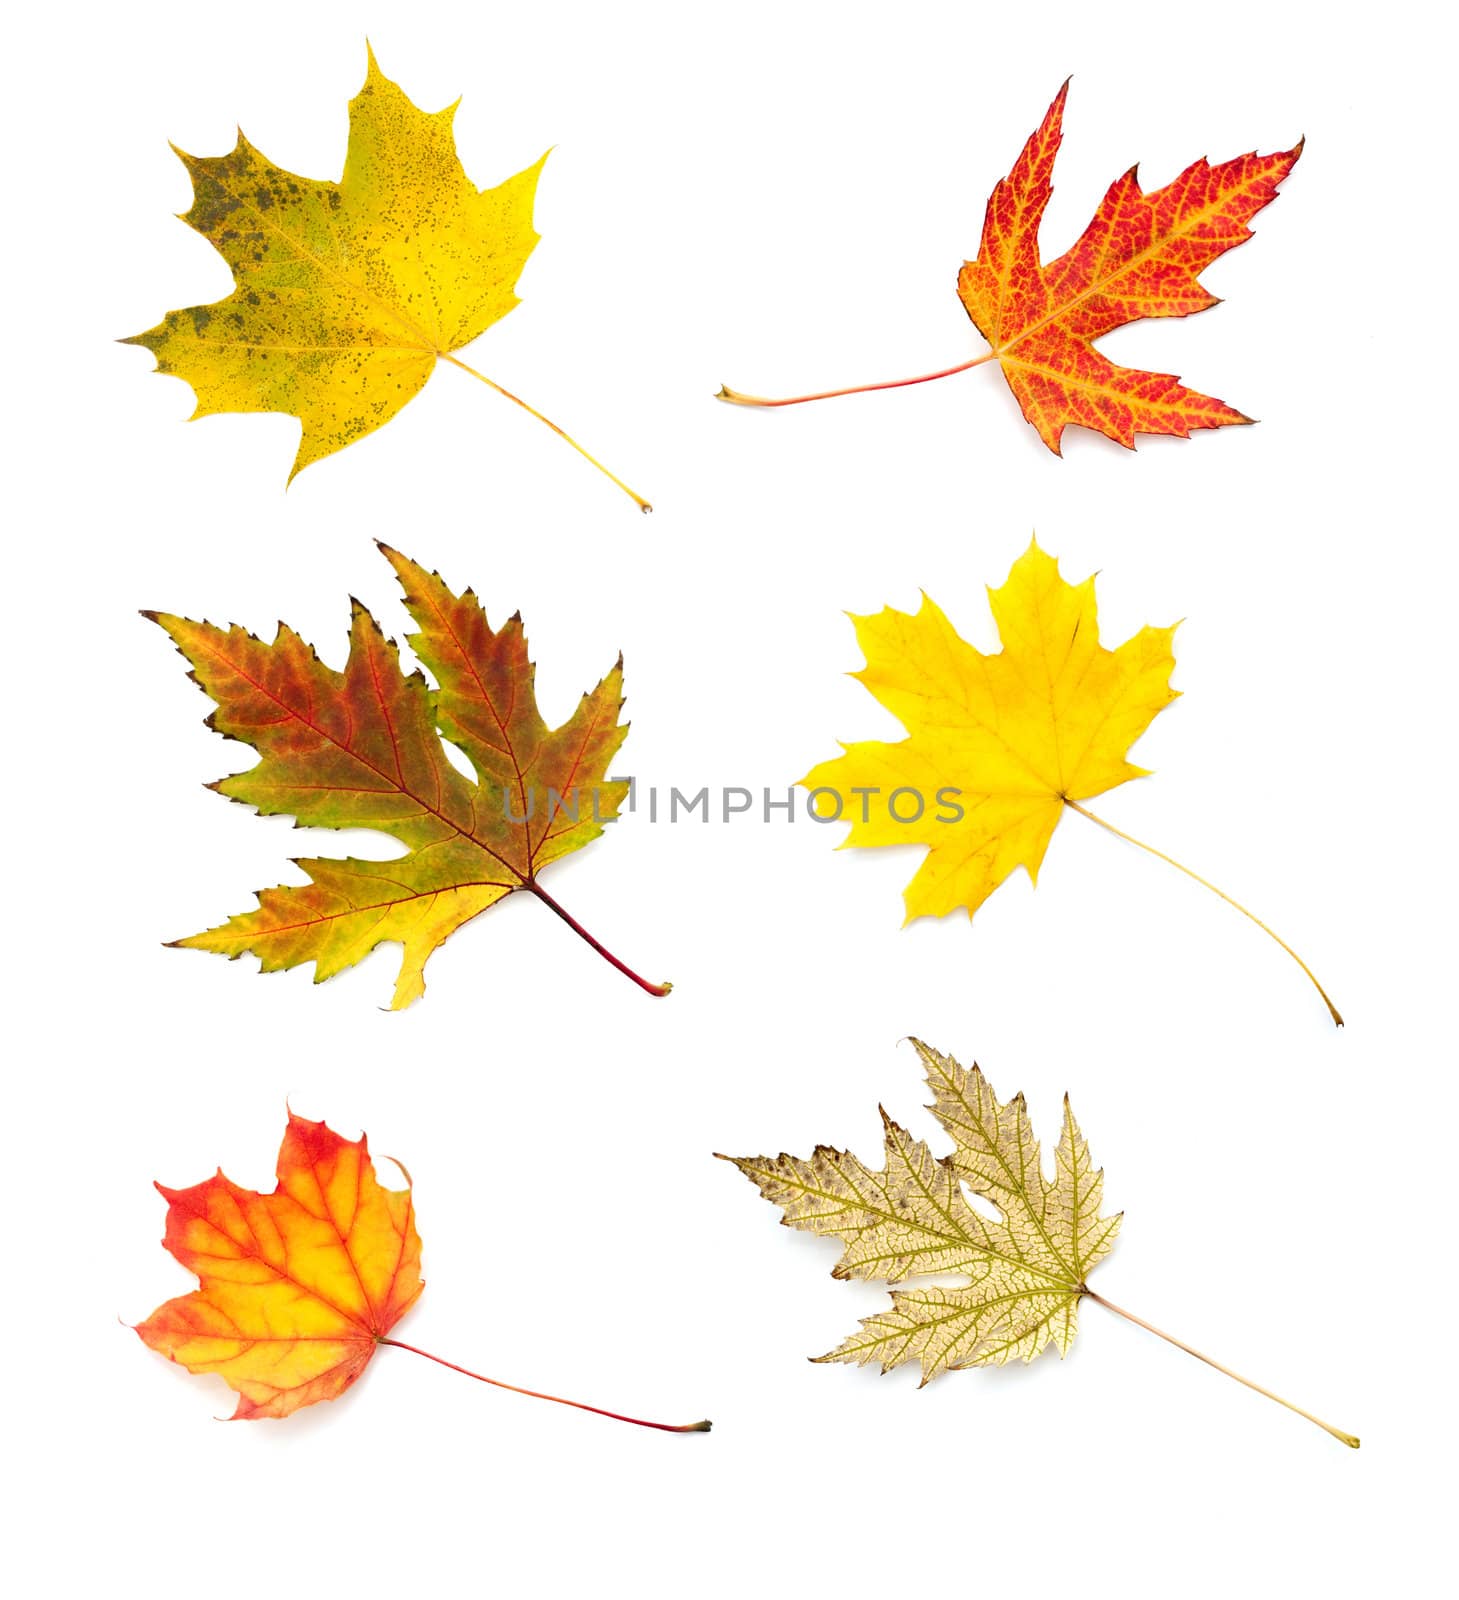 Autumn leaves collection isolated on white background by DNKSTUDIO